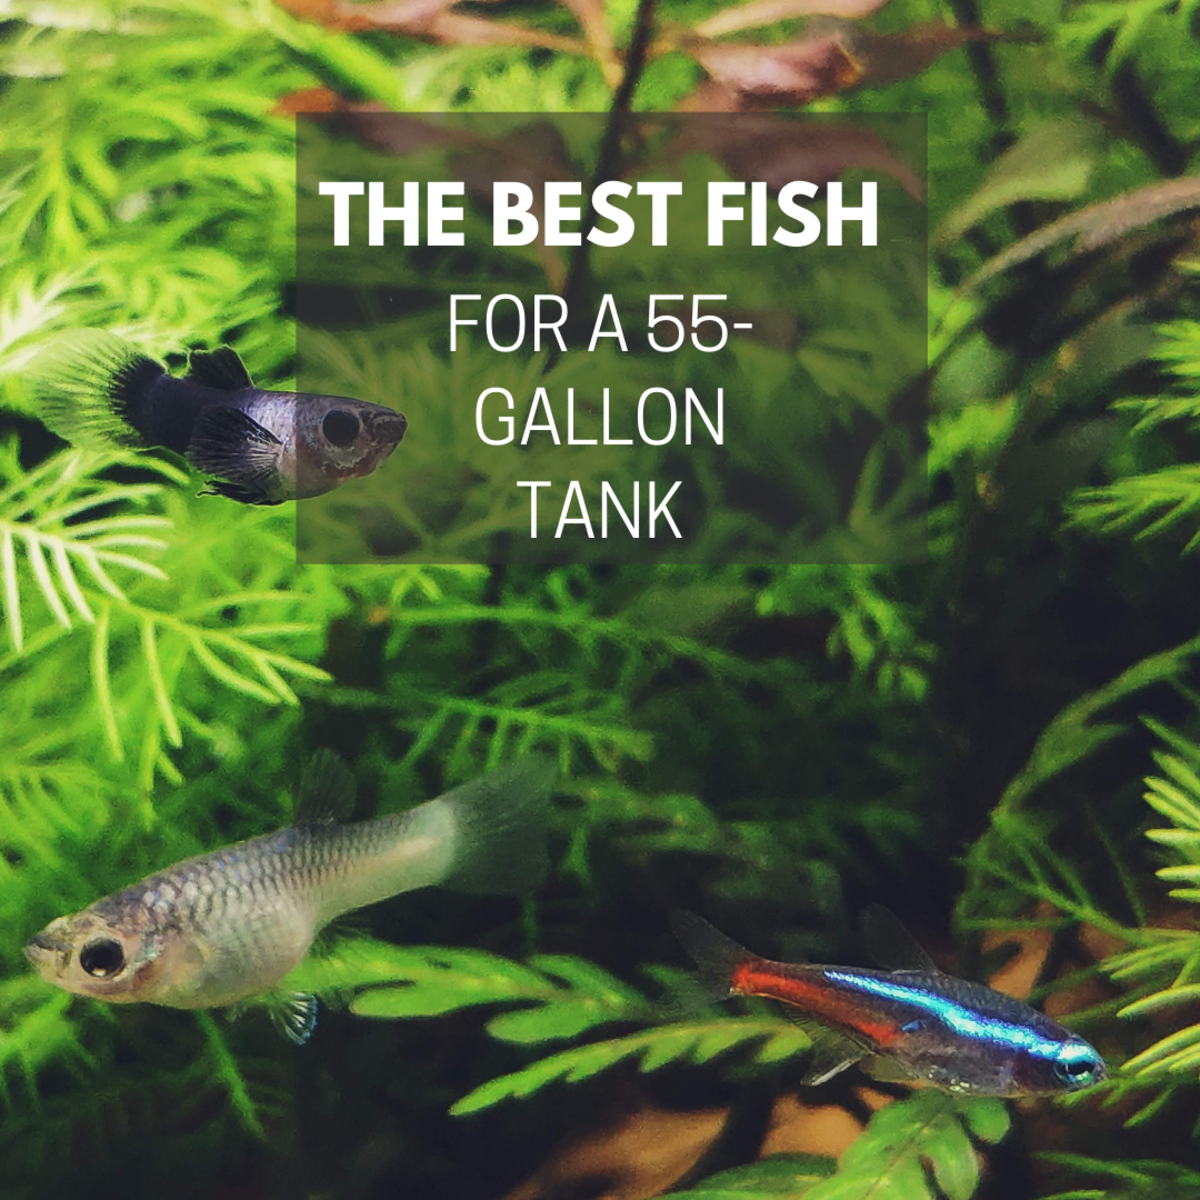 20 Best Fish for a 55-Gallon Tank